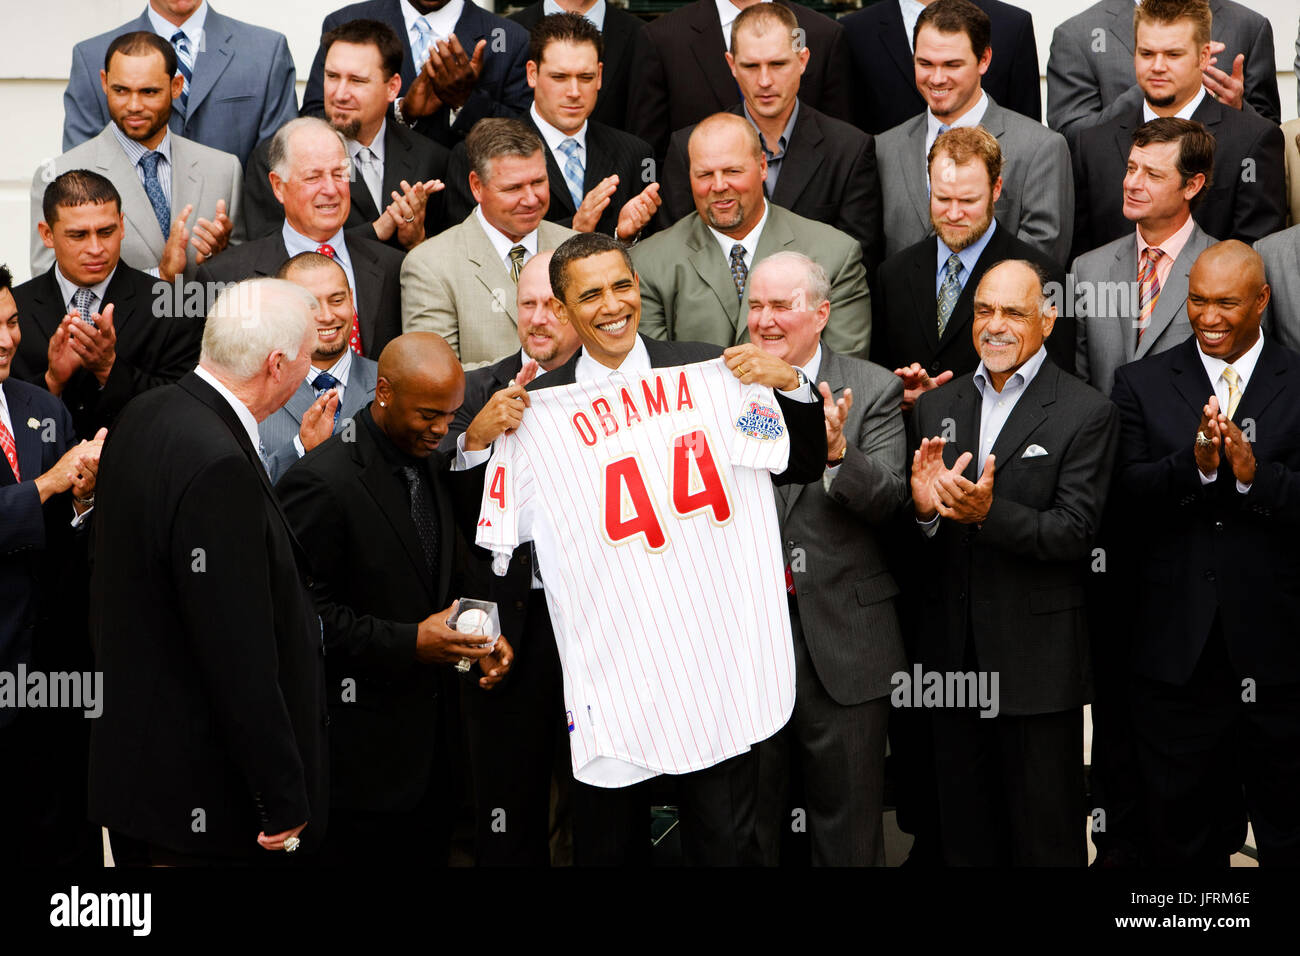 President Barack Obama meets with the 2008 World Series Champion Philadelphia Phillies at the White House, May, 13 2009. (Official White House Photo by Chuck Kennedy)  This official White House photograph is being made available for publication by news organizations and/or for personal use printing by the subject(s) of the photograph. The photograph may not be manipulated in any way or used in materials, advertisements, products, or promotions that in any way suggest approval or endorsement of the President, the First Family, or the White House. Stock Photo